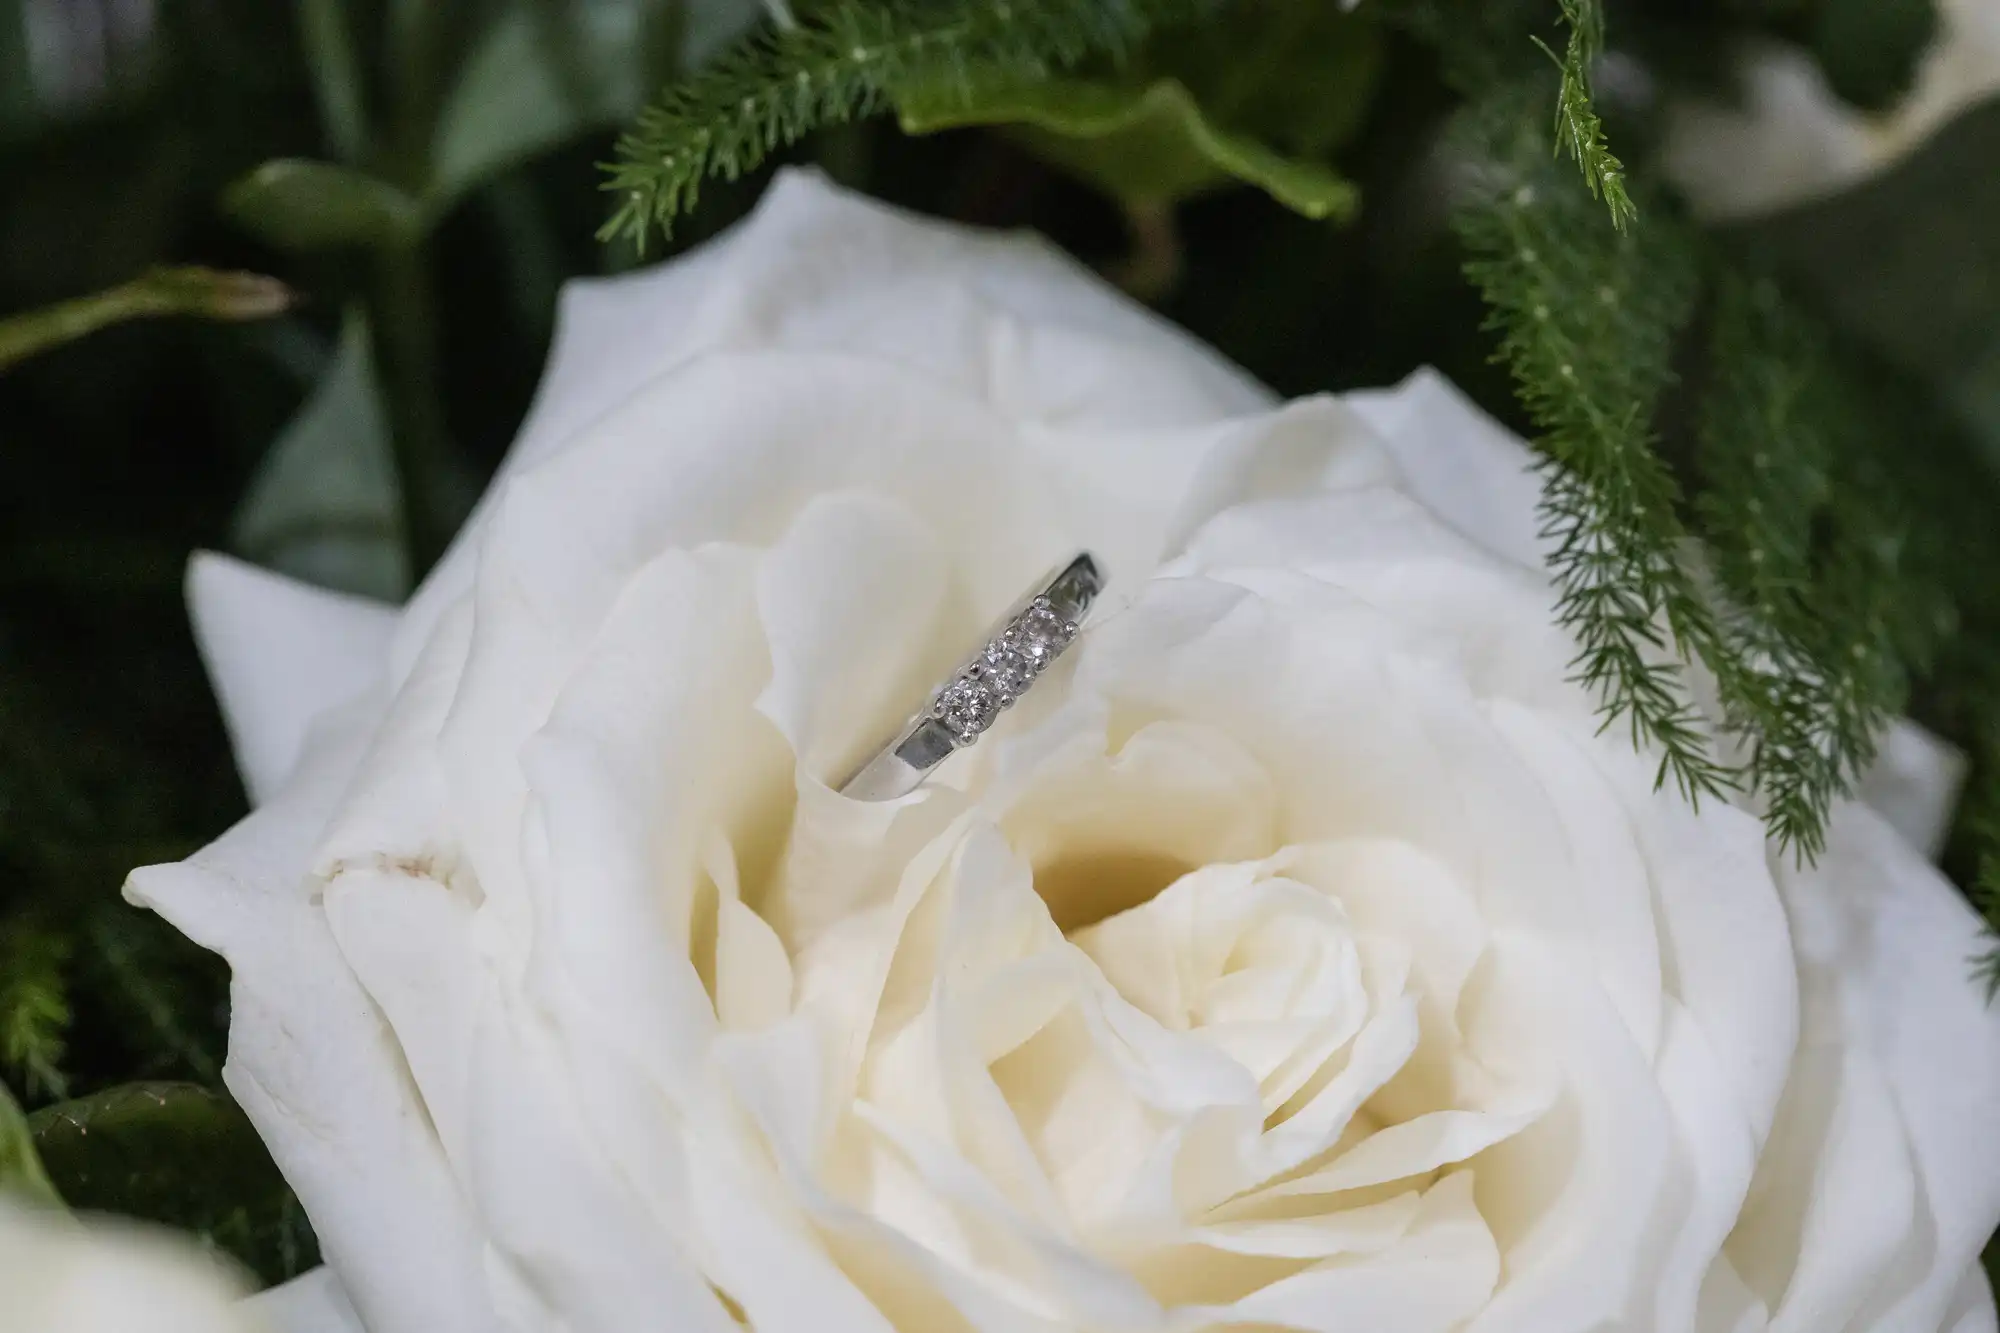 A diamond engagement ring placed on the petals of a white rose surrounded by greenery.